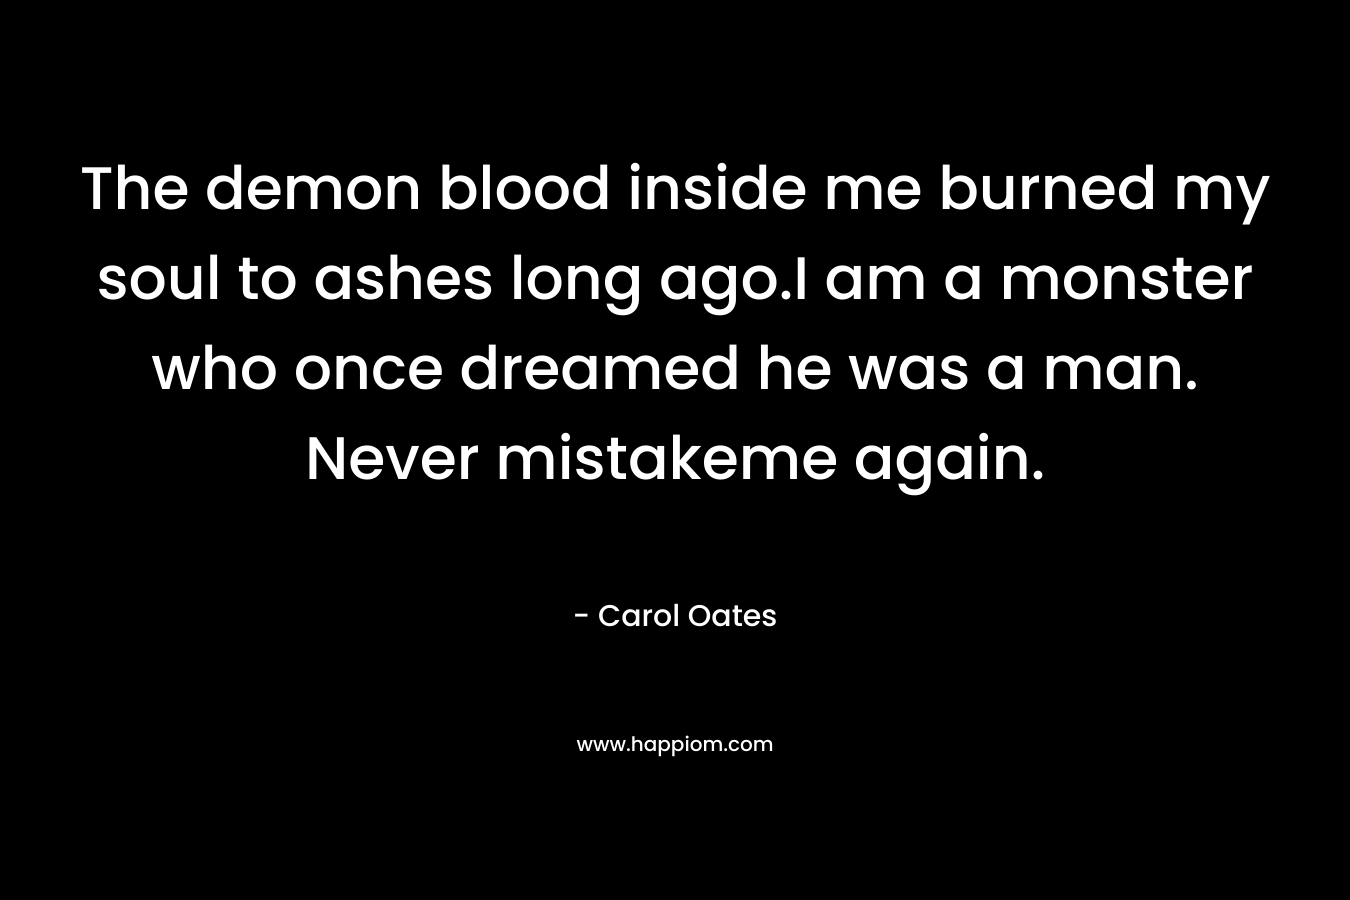 The demon blood inside me burned my soul to ashes long ago.I am a monster who once dreamed he was a man. Never mistakeme again. – Carol Oates